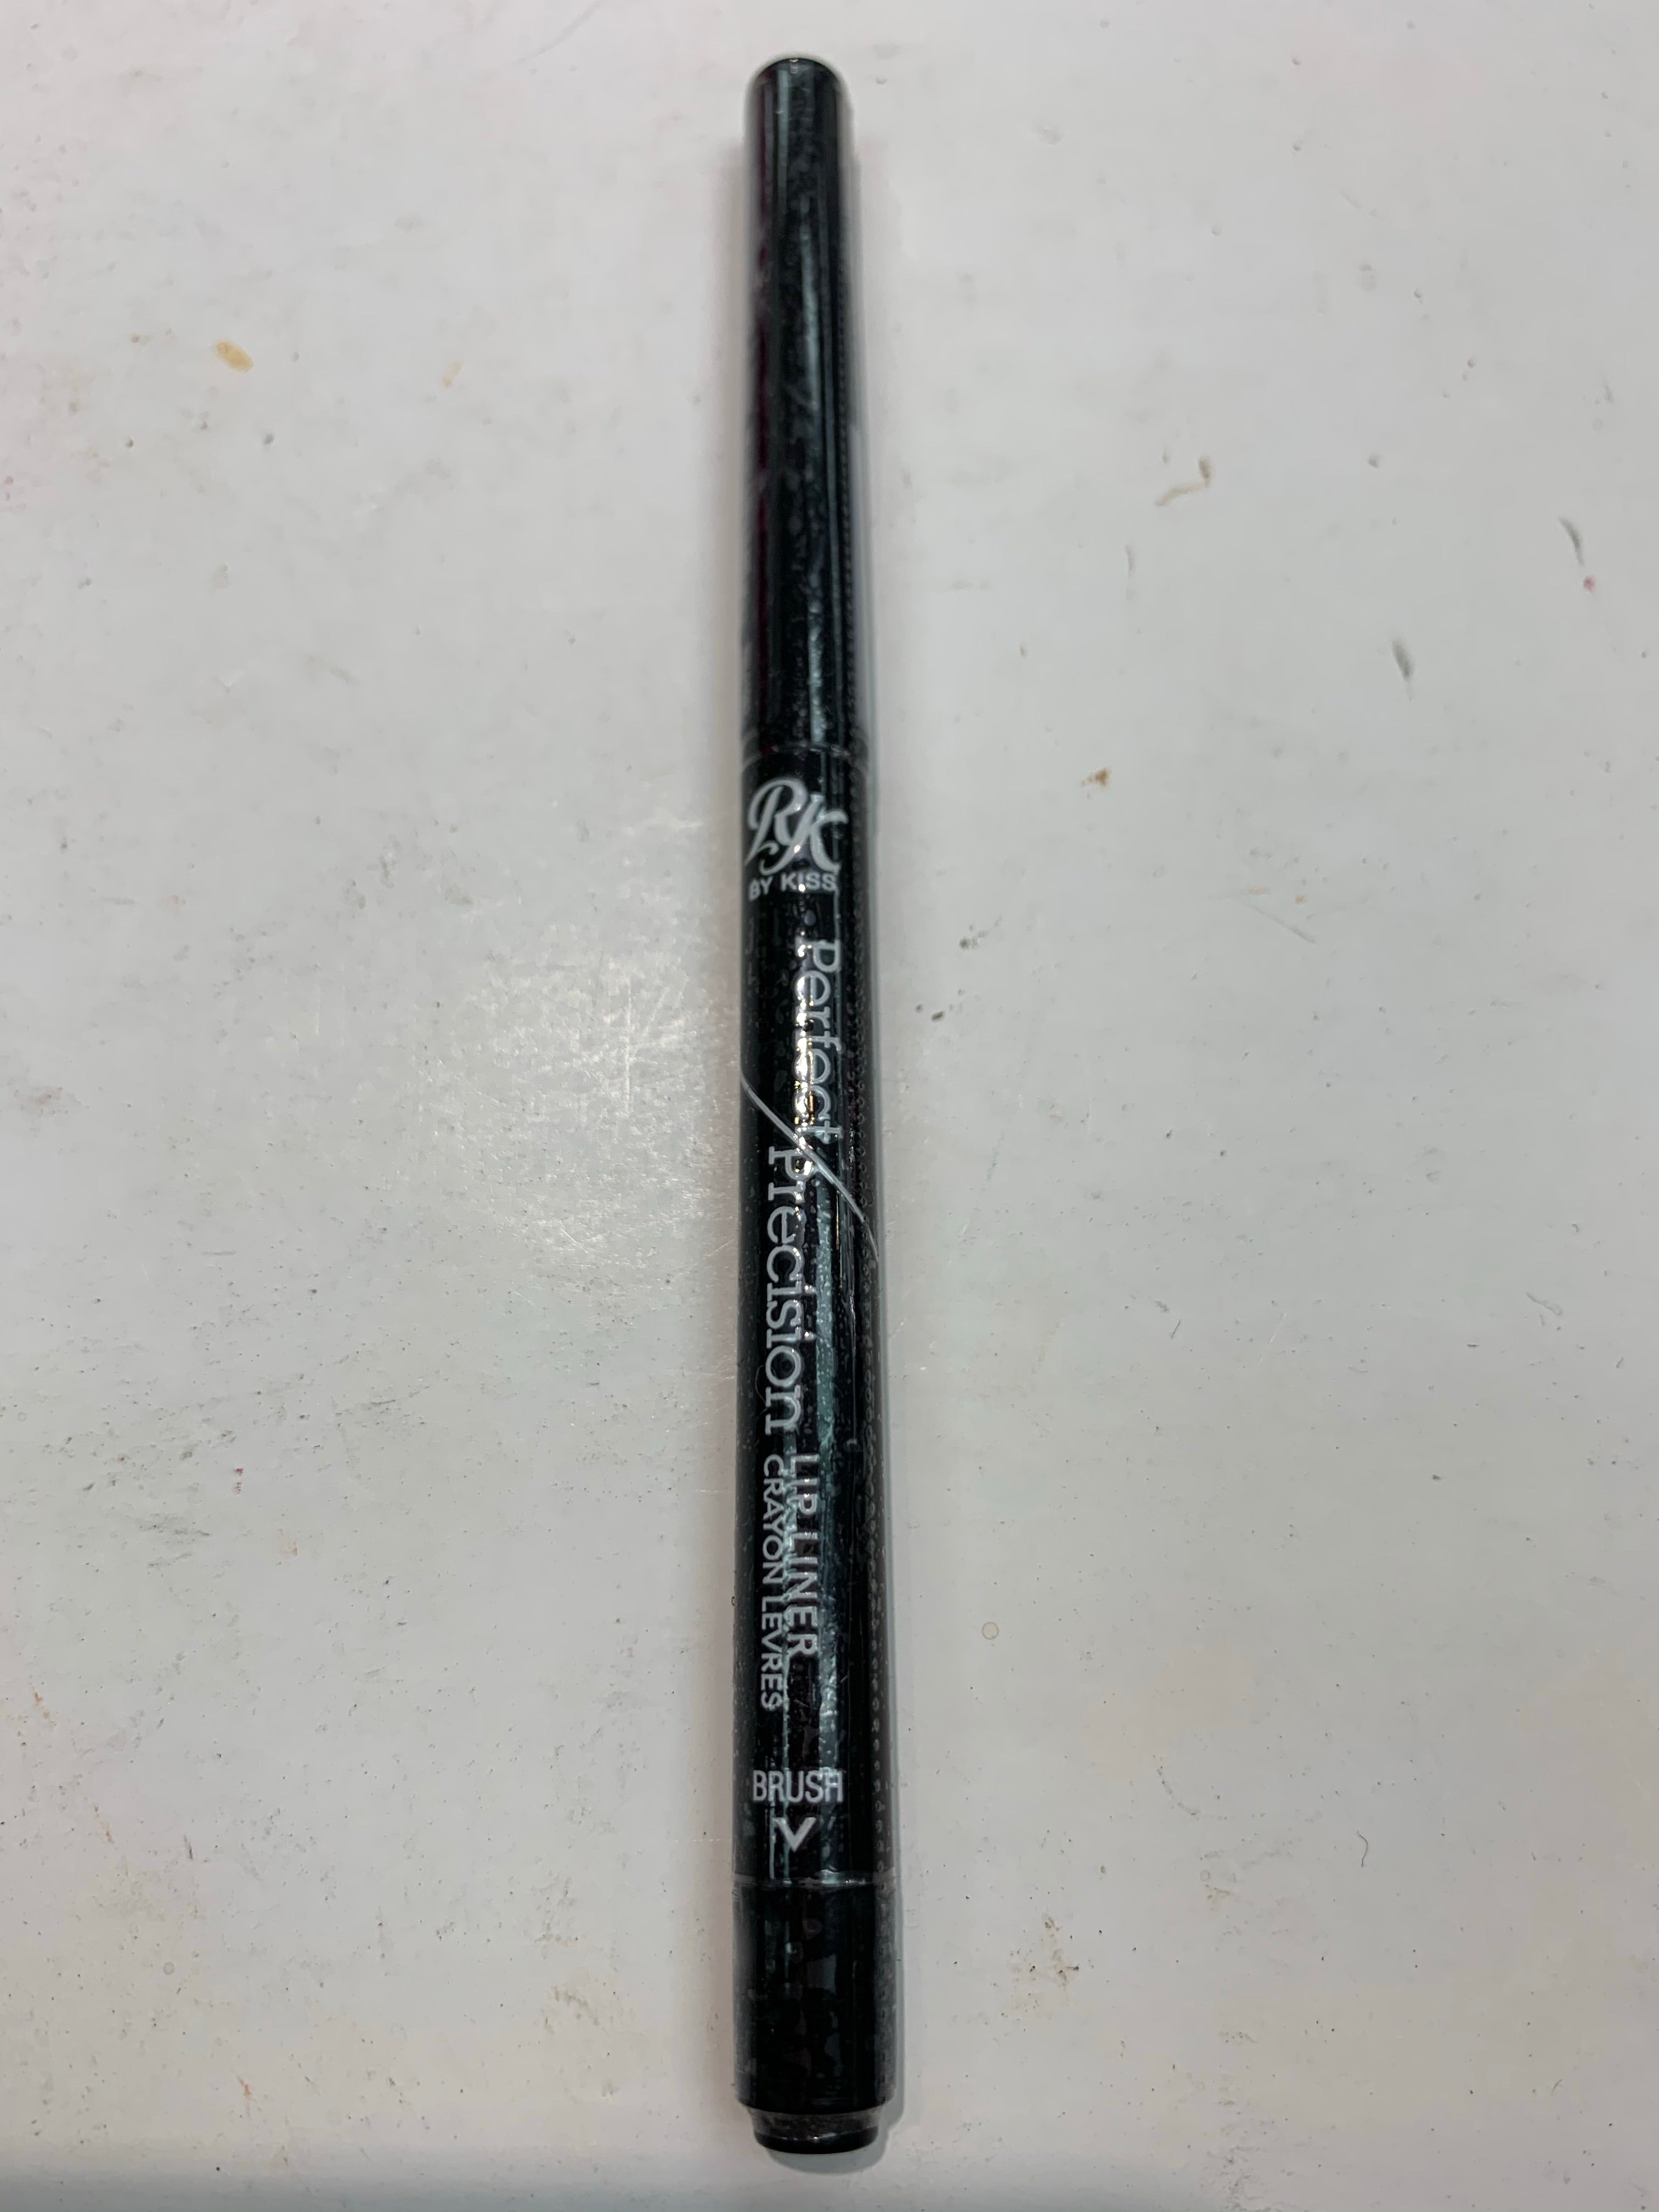 Rk by kiss perfect precision lip liner